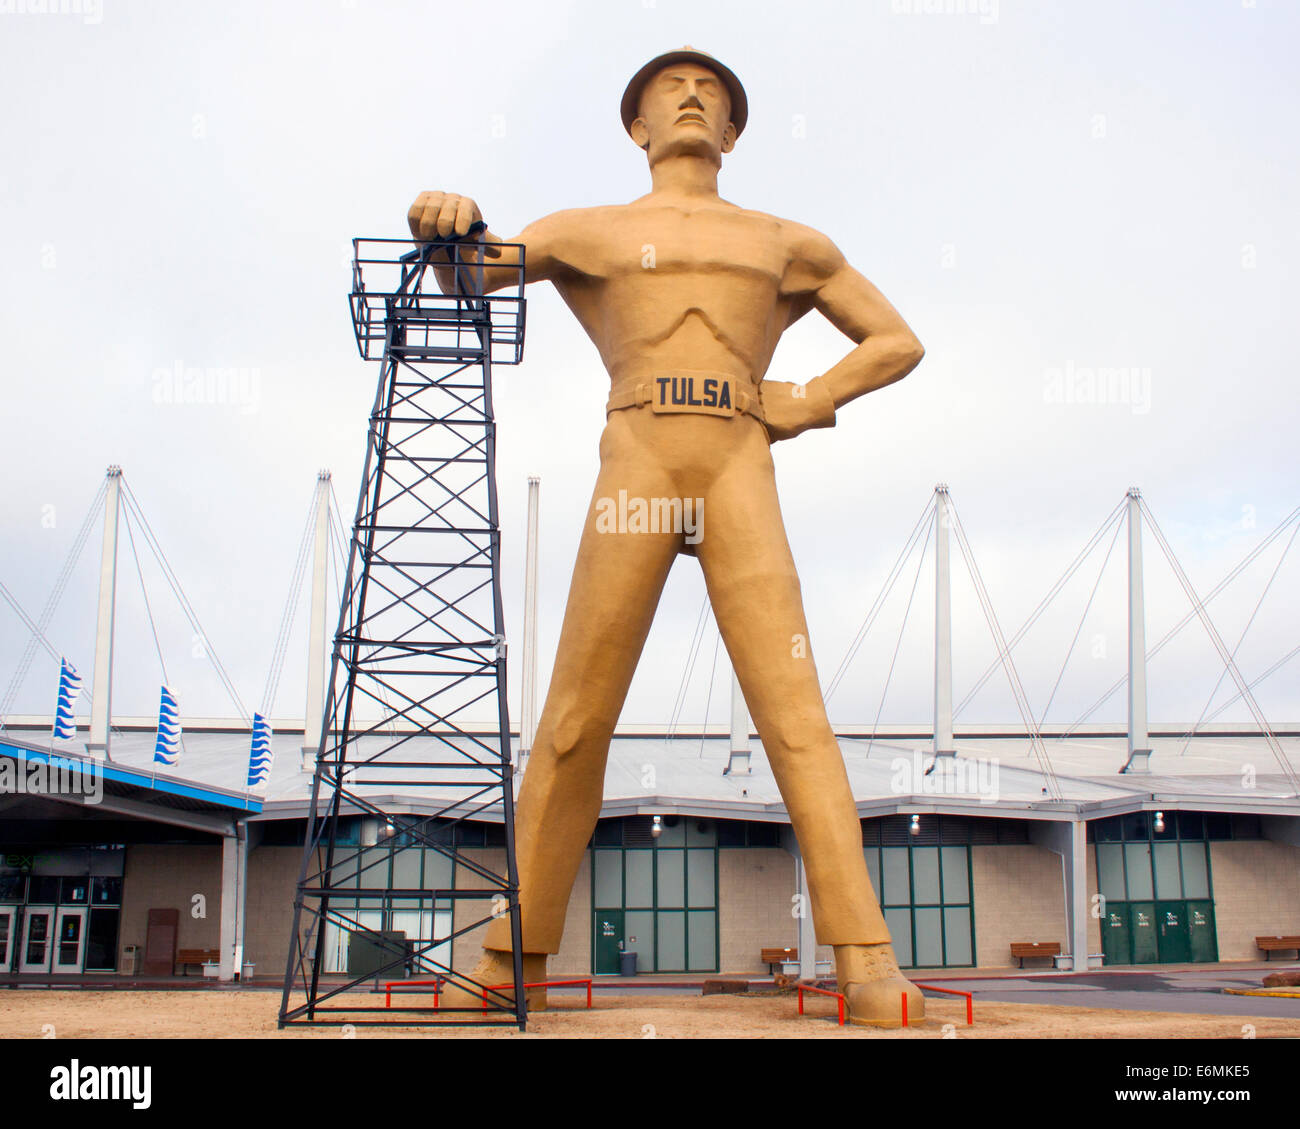 Giant Oil Driller Man Sculpture at the old Worlds Fairground in Tulsa Oklahoma Stock Photo